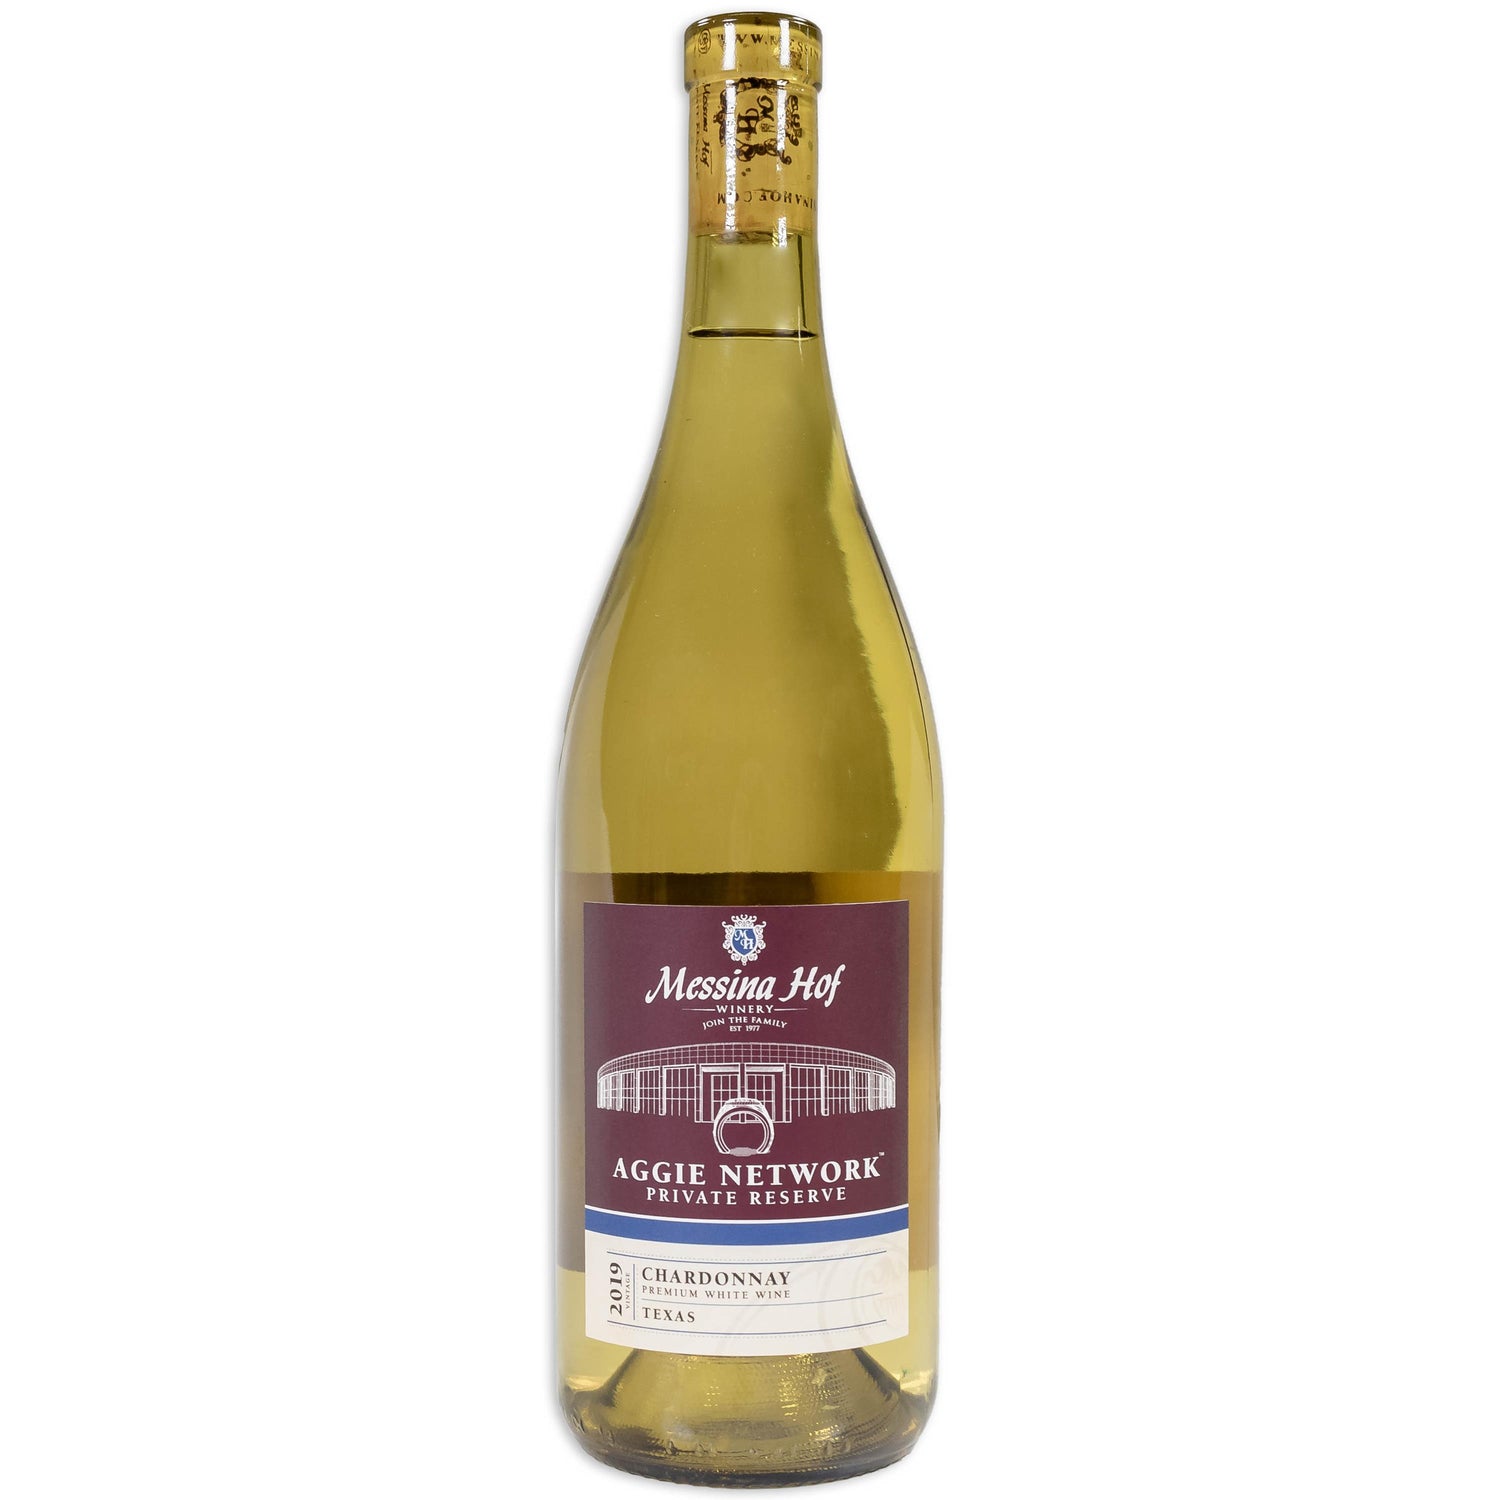 In Store Pickup Or Local Delivery Only: Messina Hof Chardonnay Premium